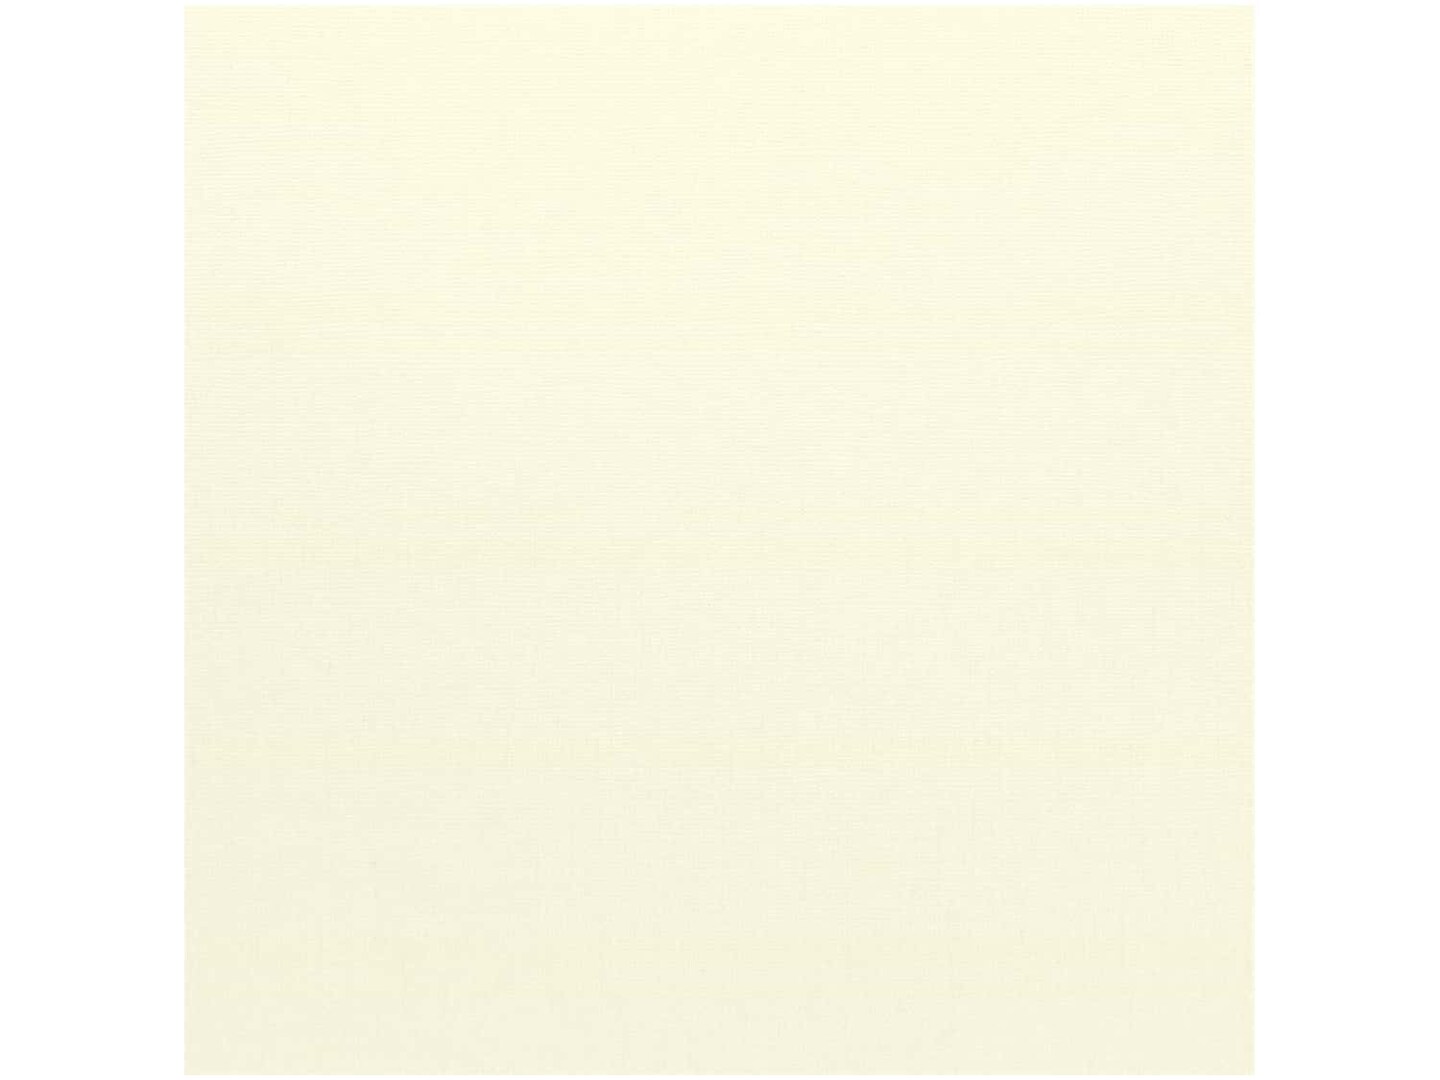  Bazzill CREAM PUFF 12x12 Textured Cardstock, 80 lb Off-White  Colored Scrapbook Paper, Premium Card Making and Paper Crafting Supplies